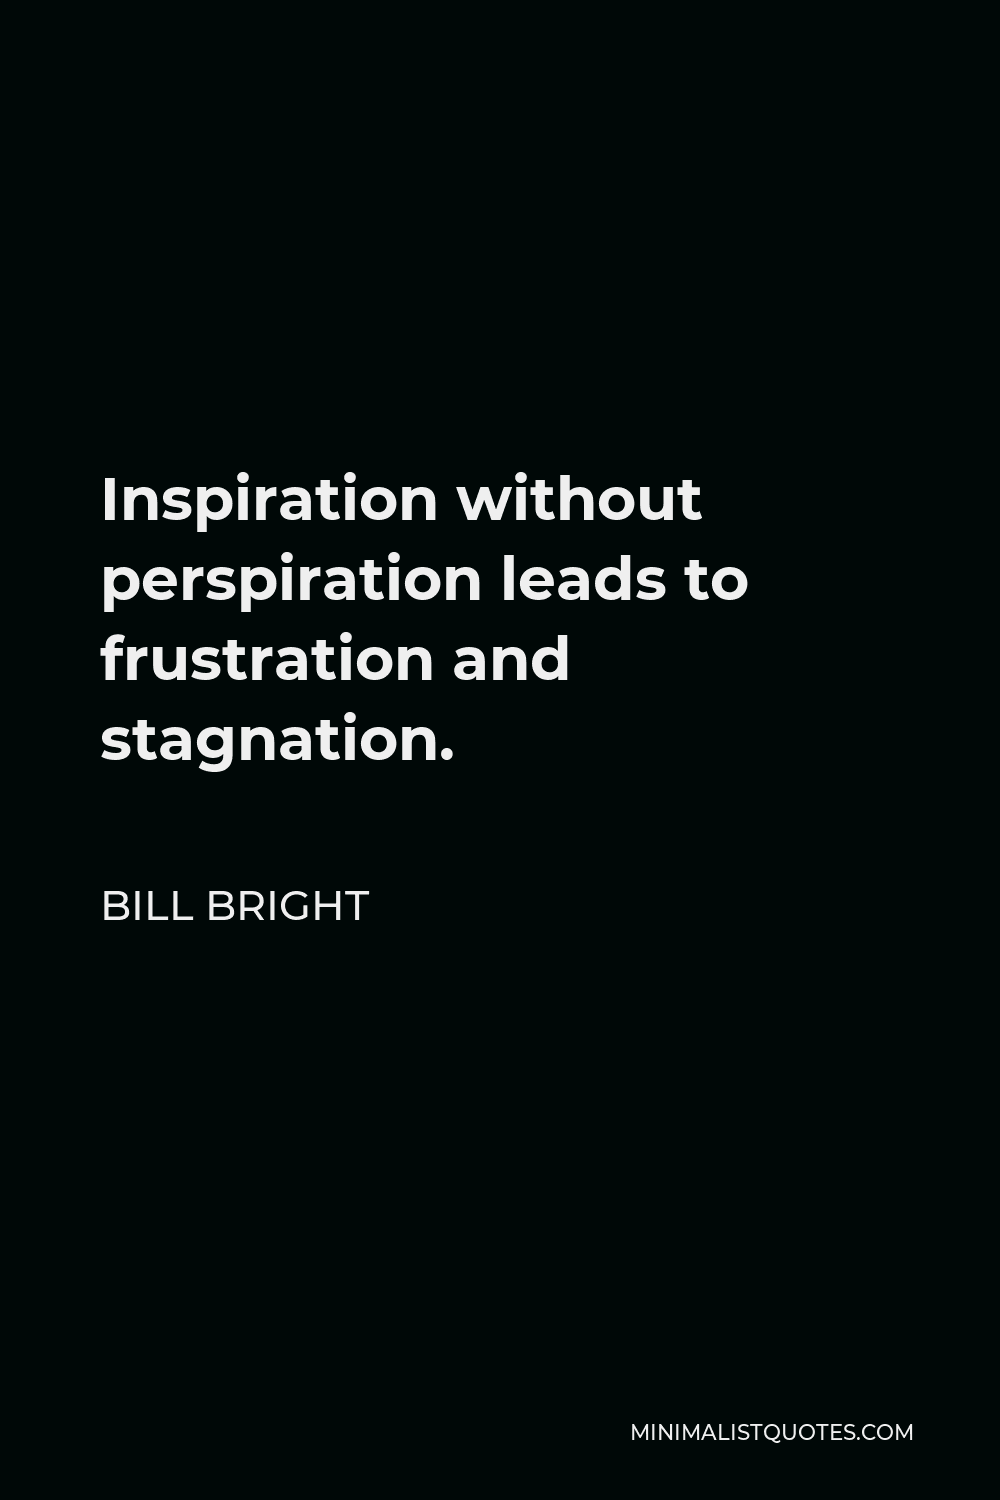 Bill Bright Quote - Inspiration without perspiration leads to frustration and stagnation.